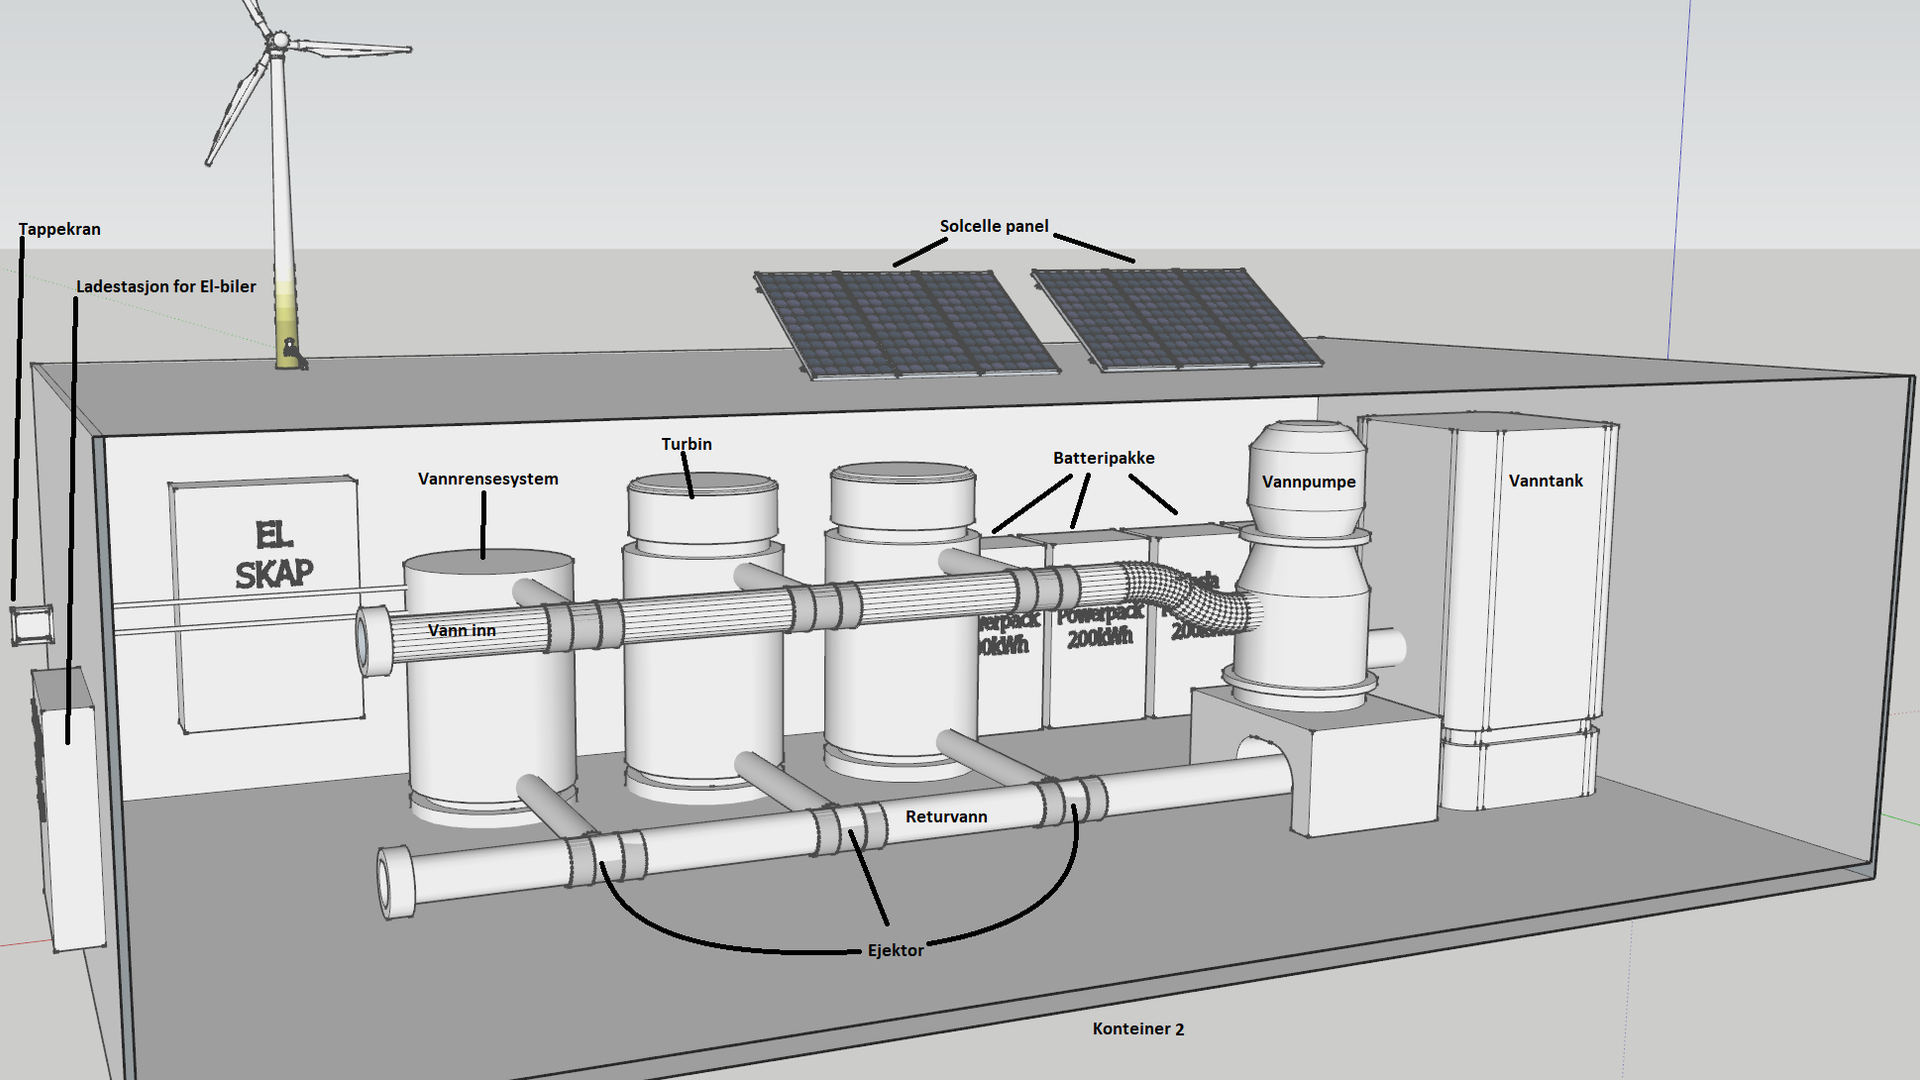 Sketch of a very small hydropower plant in a container